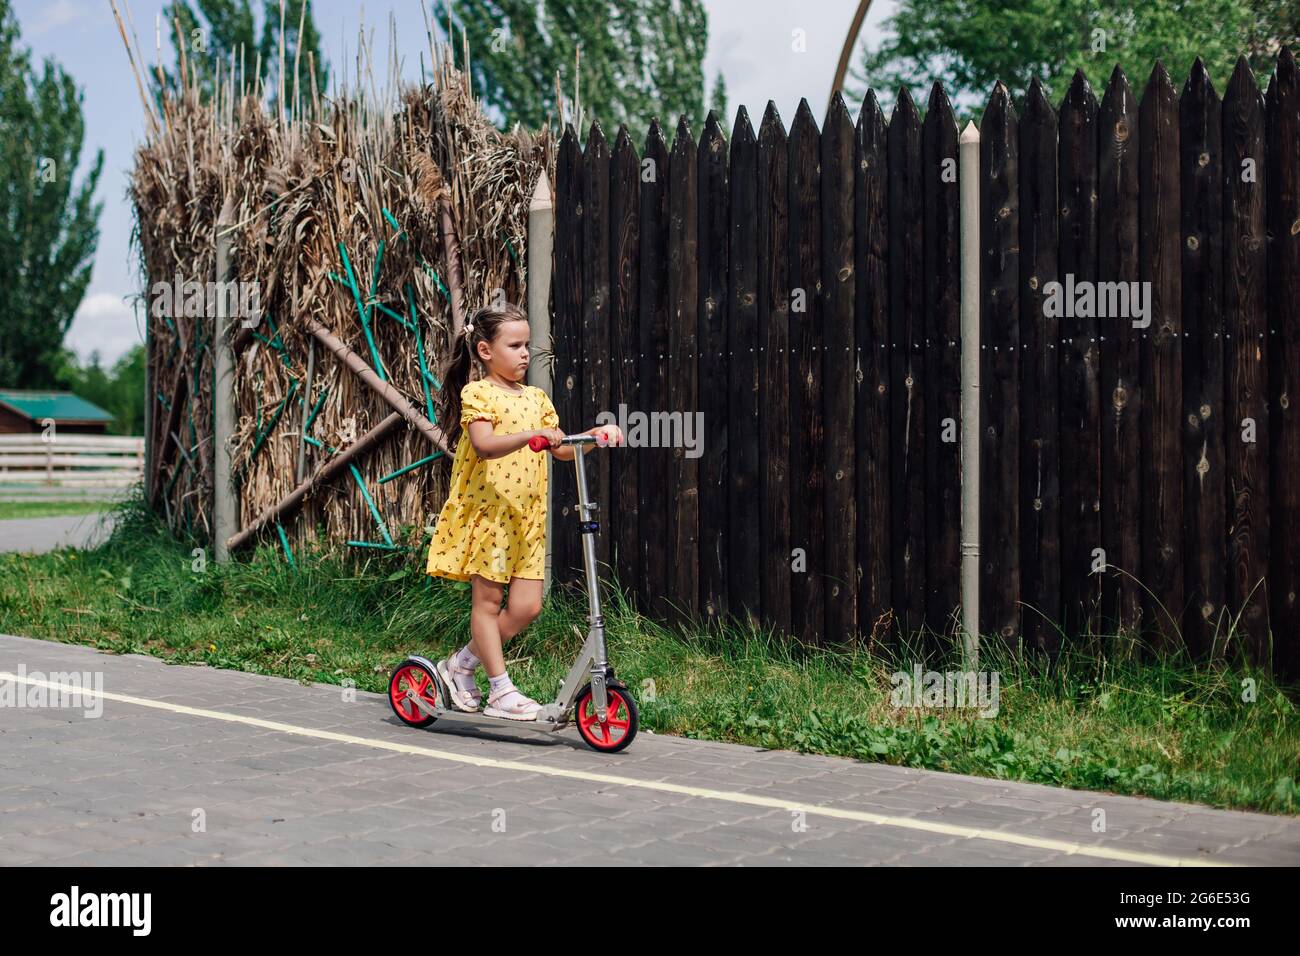 a walk on a scooter of a girl in a yellow dress past a wooden or reed fence on a summer day Stock Photo